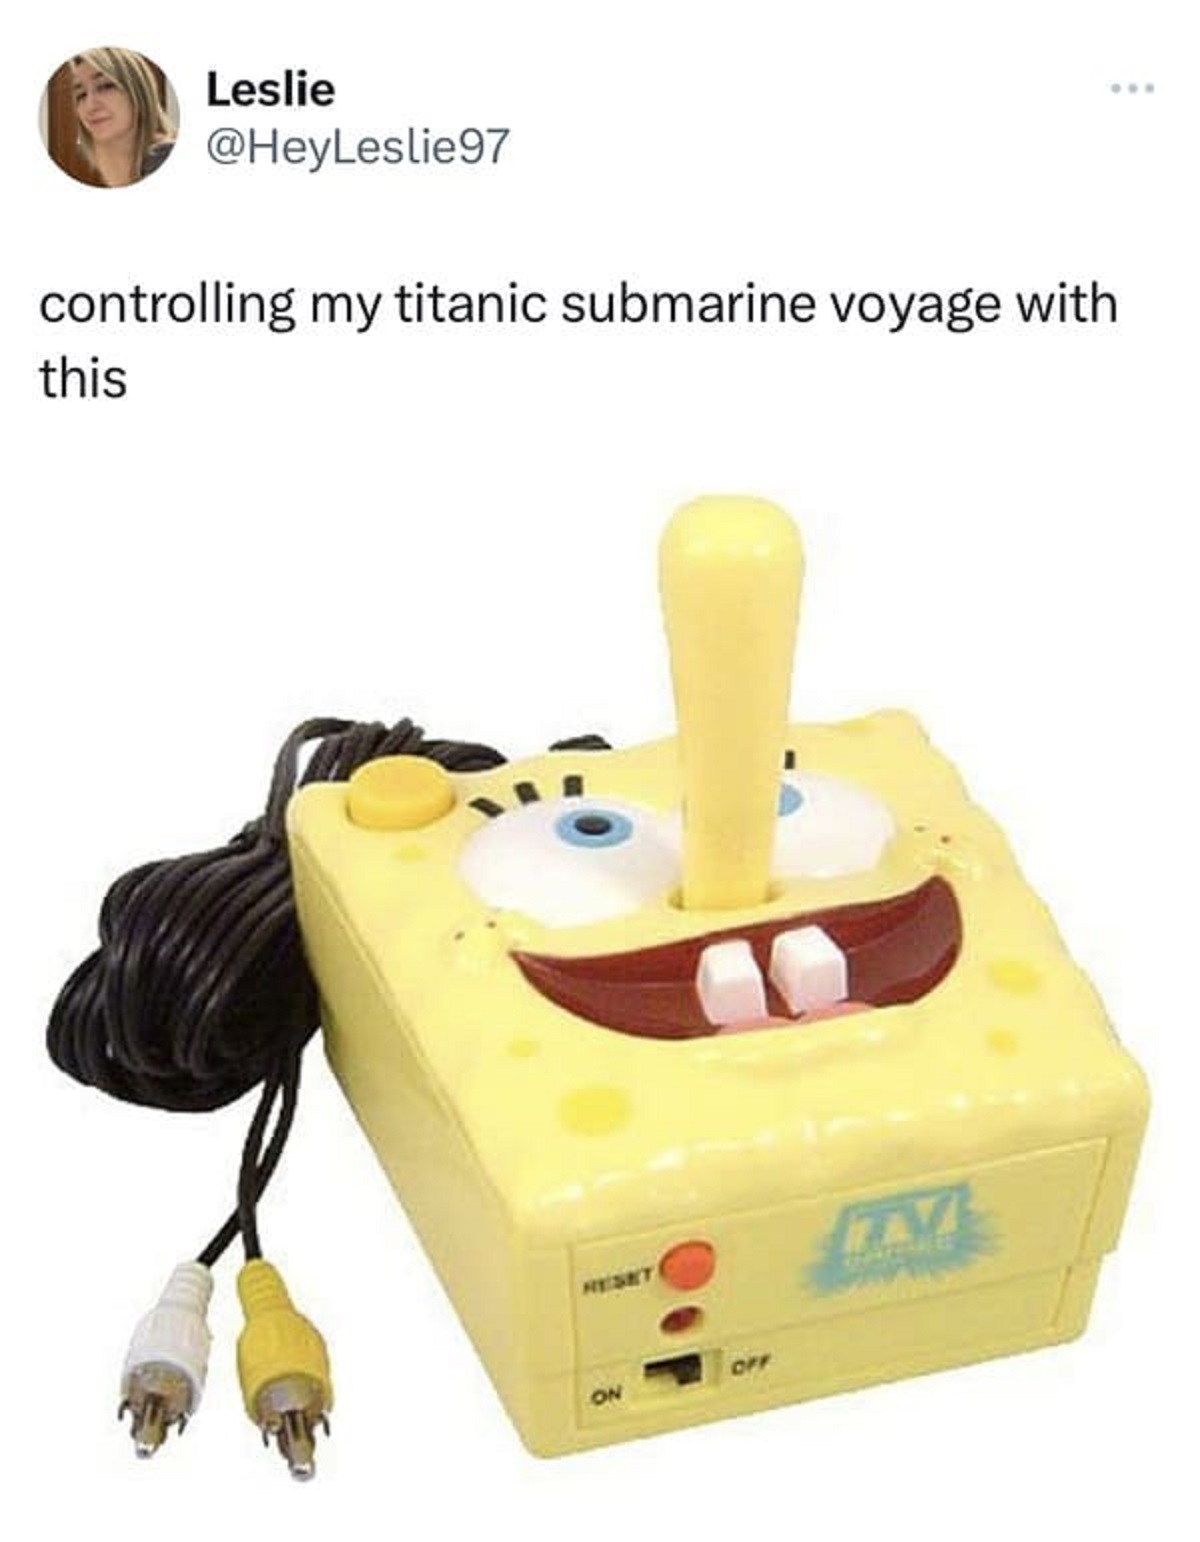 submarine controller meme - Leslie controlling my titanic submarine voyage with this Reset On Off M